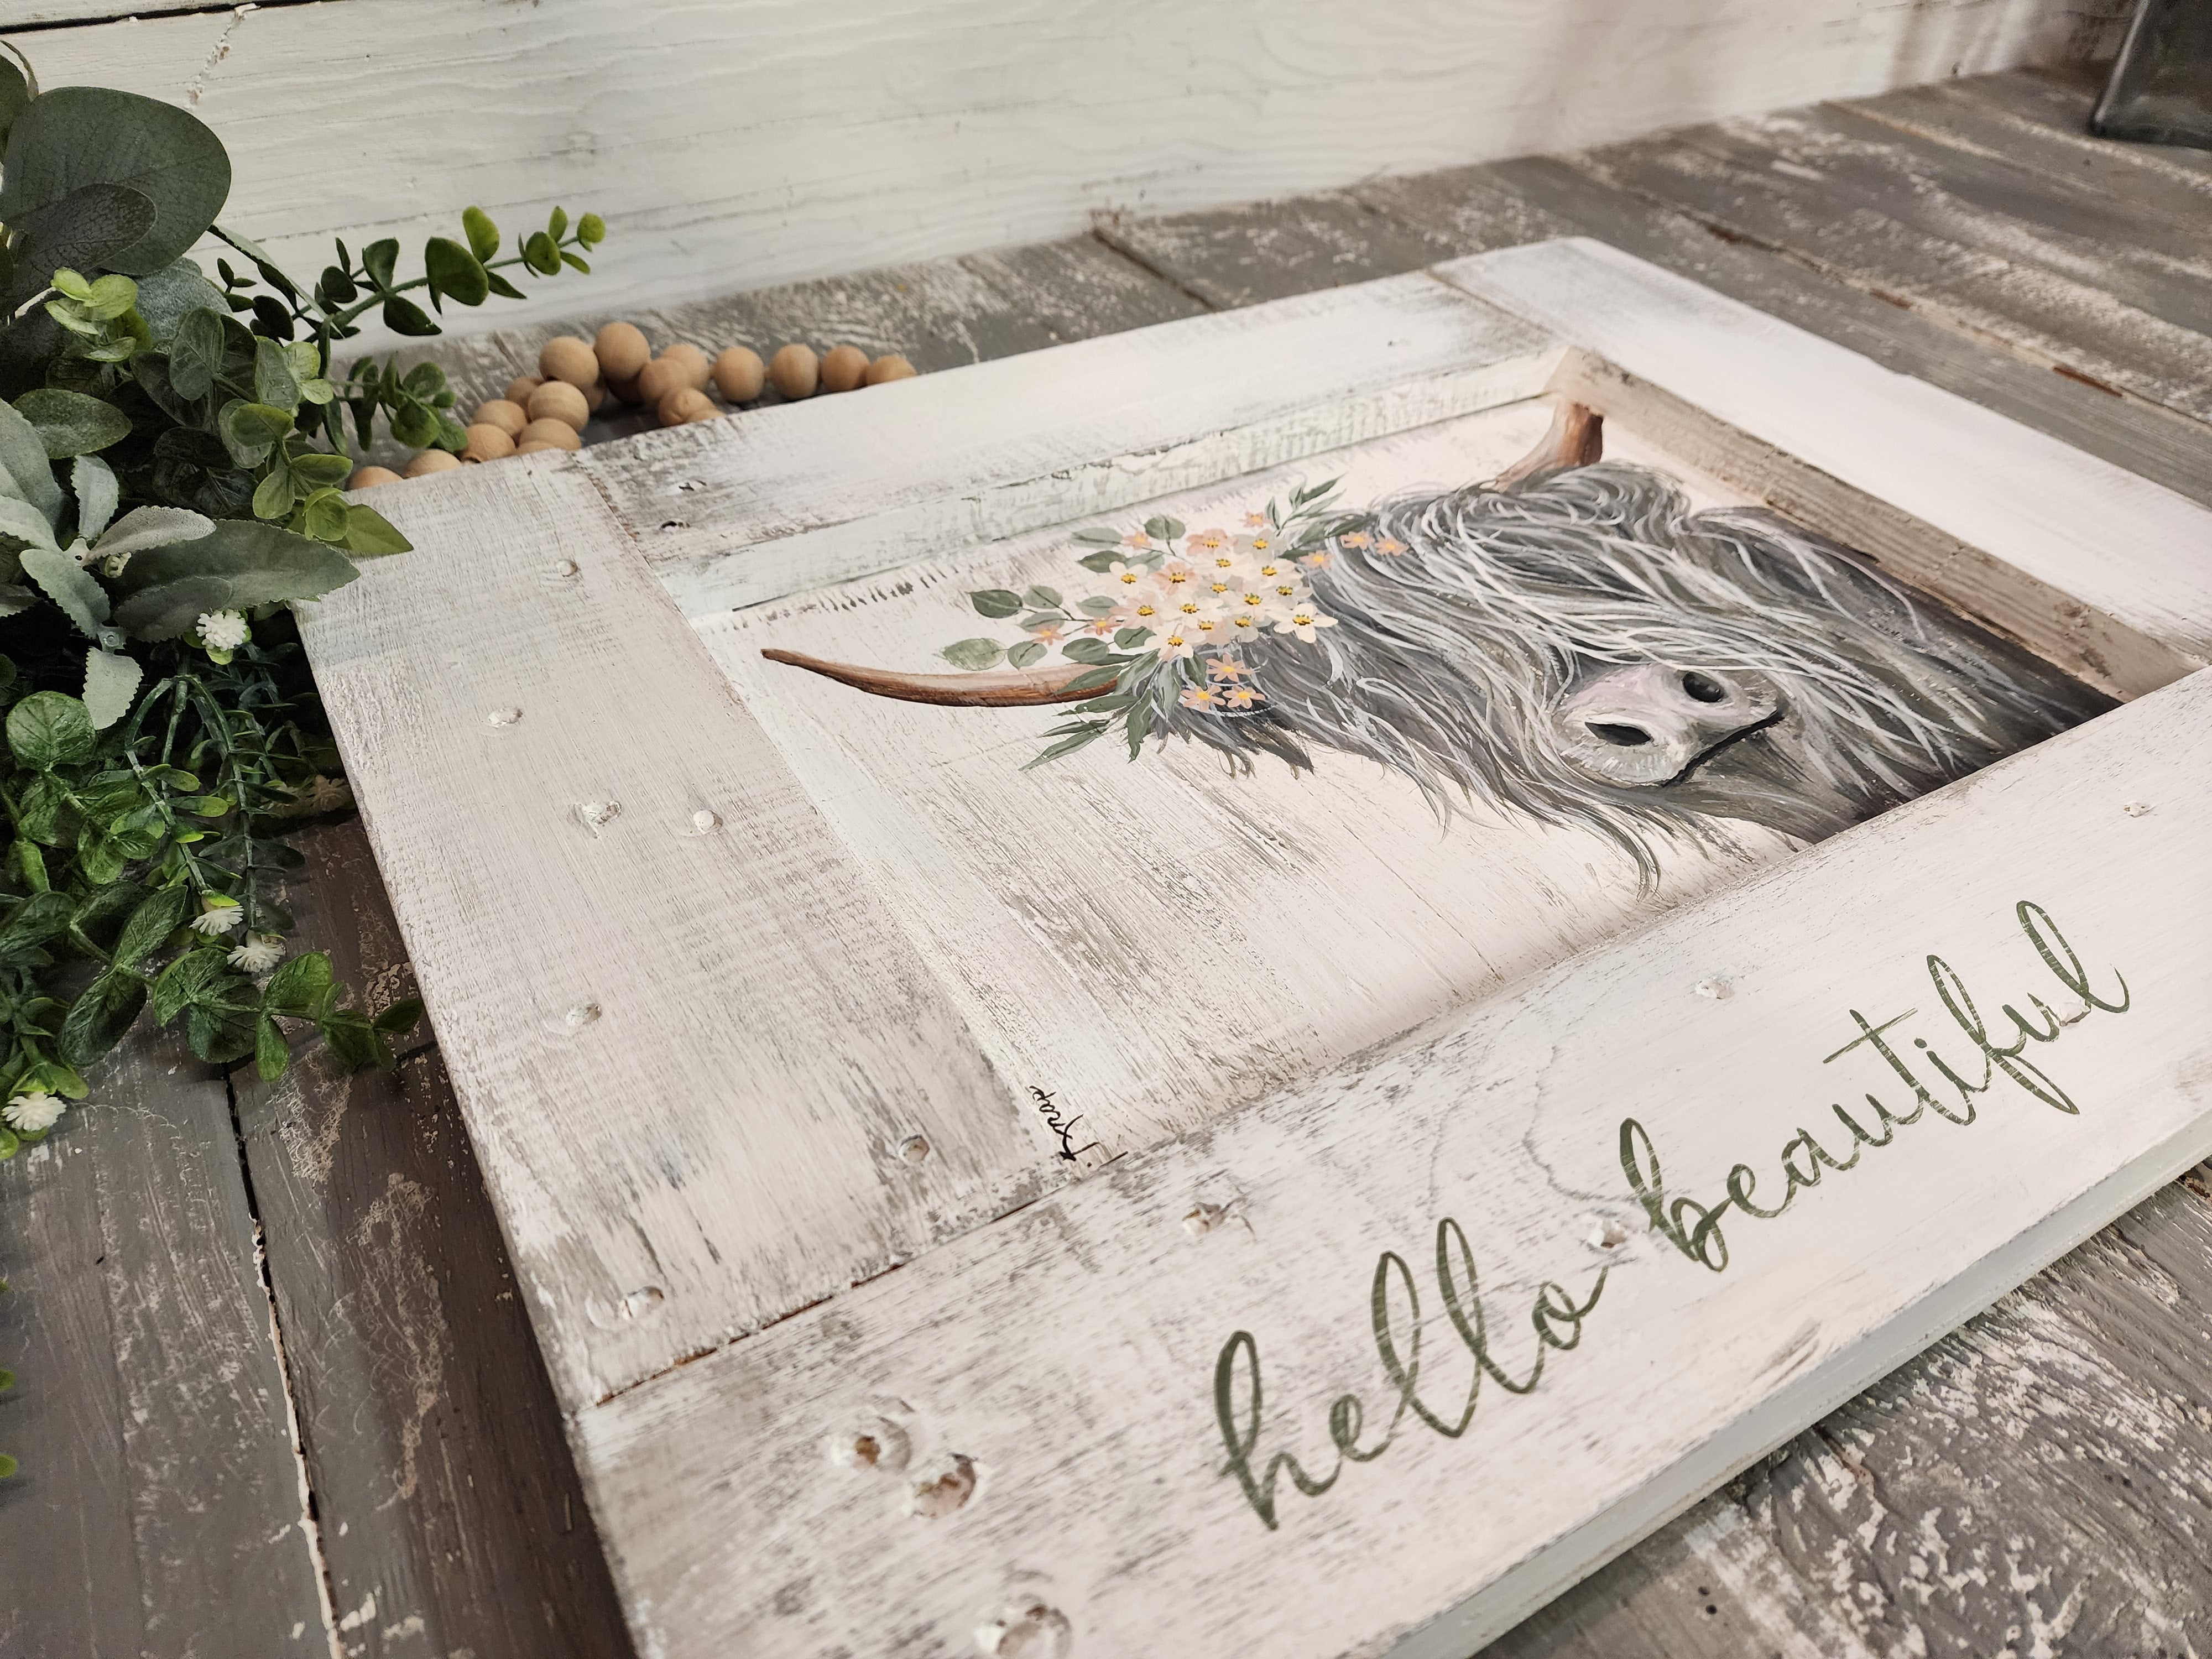 Highland cow with flower crown, Grey nursery decor hand painted on rustic recycled pallet wood, hello beautiful, peach cream flowers